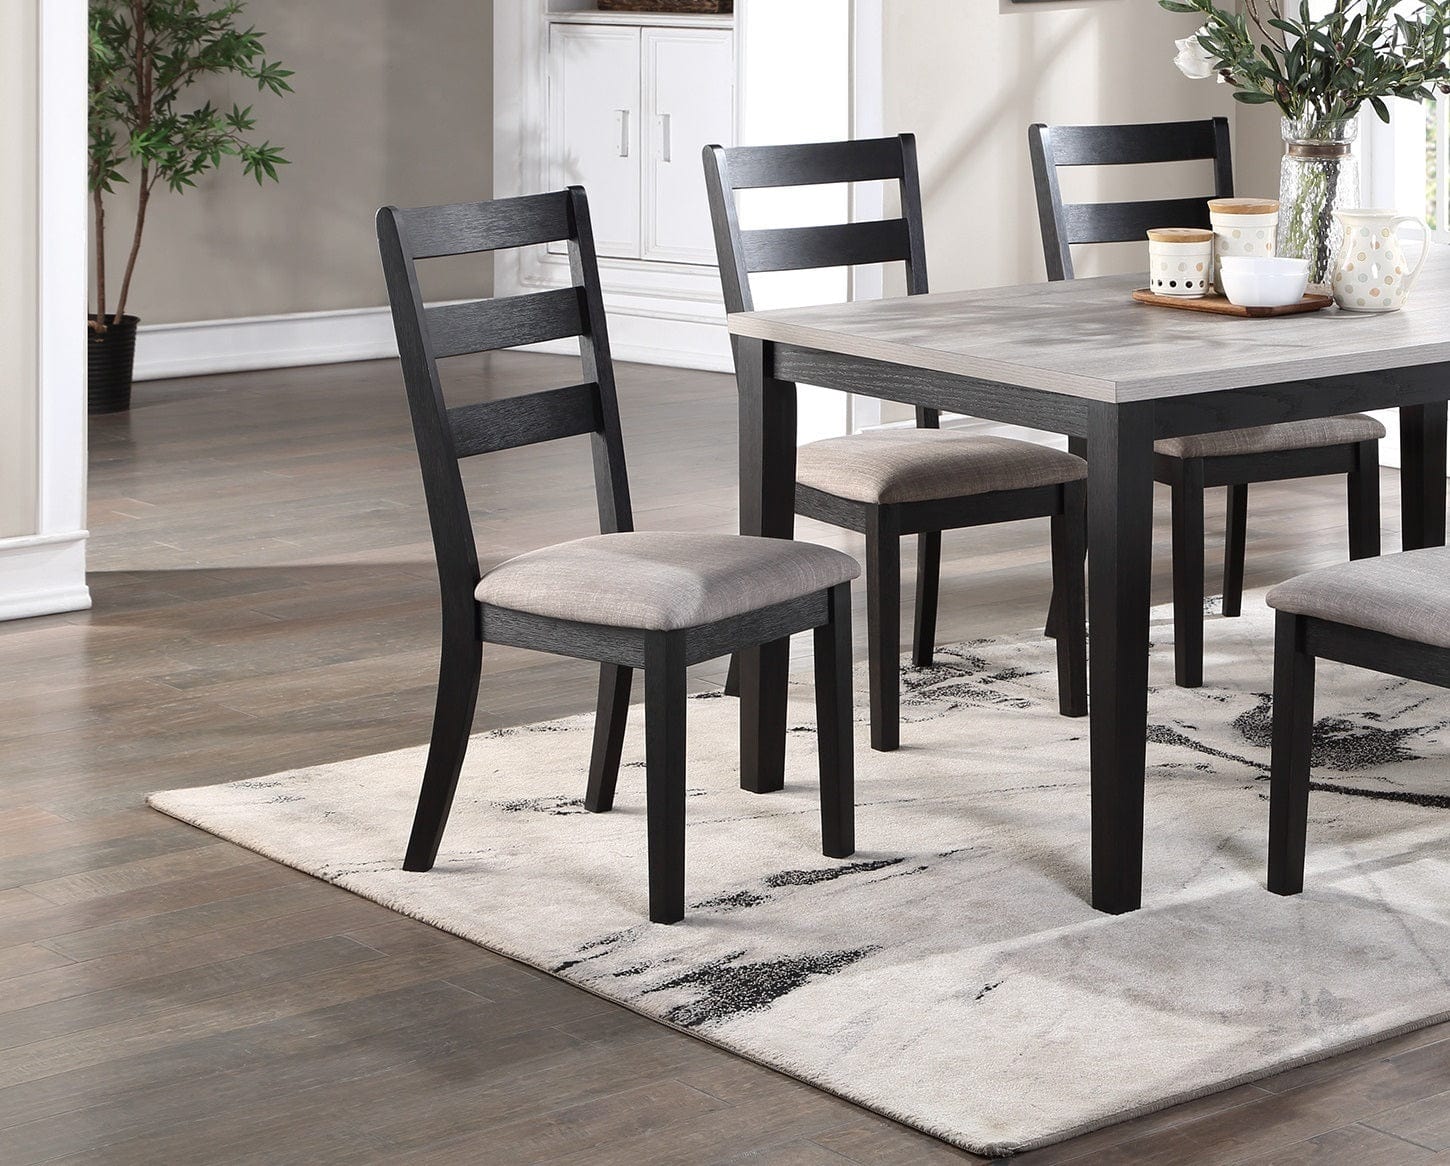 1st Choice Furniture Direct Dining Sets 1st Choice Natural Wooden 7pc Cushion Dining Set with Back Side Chairs